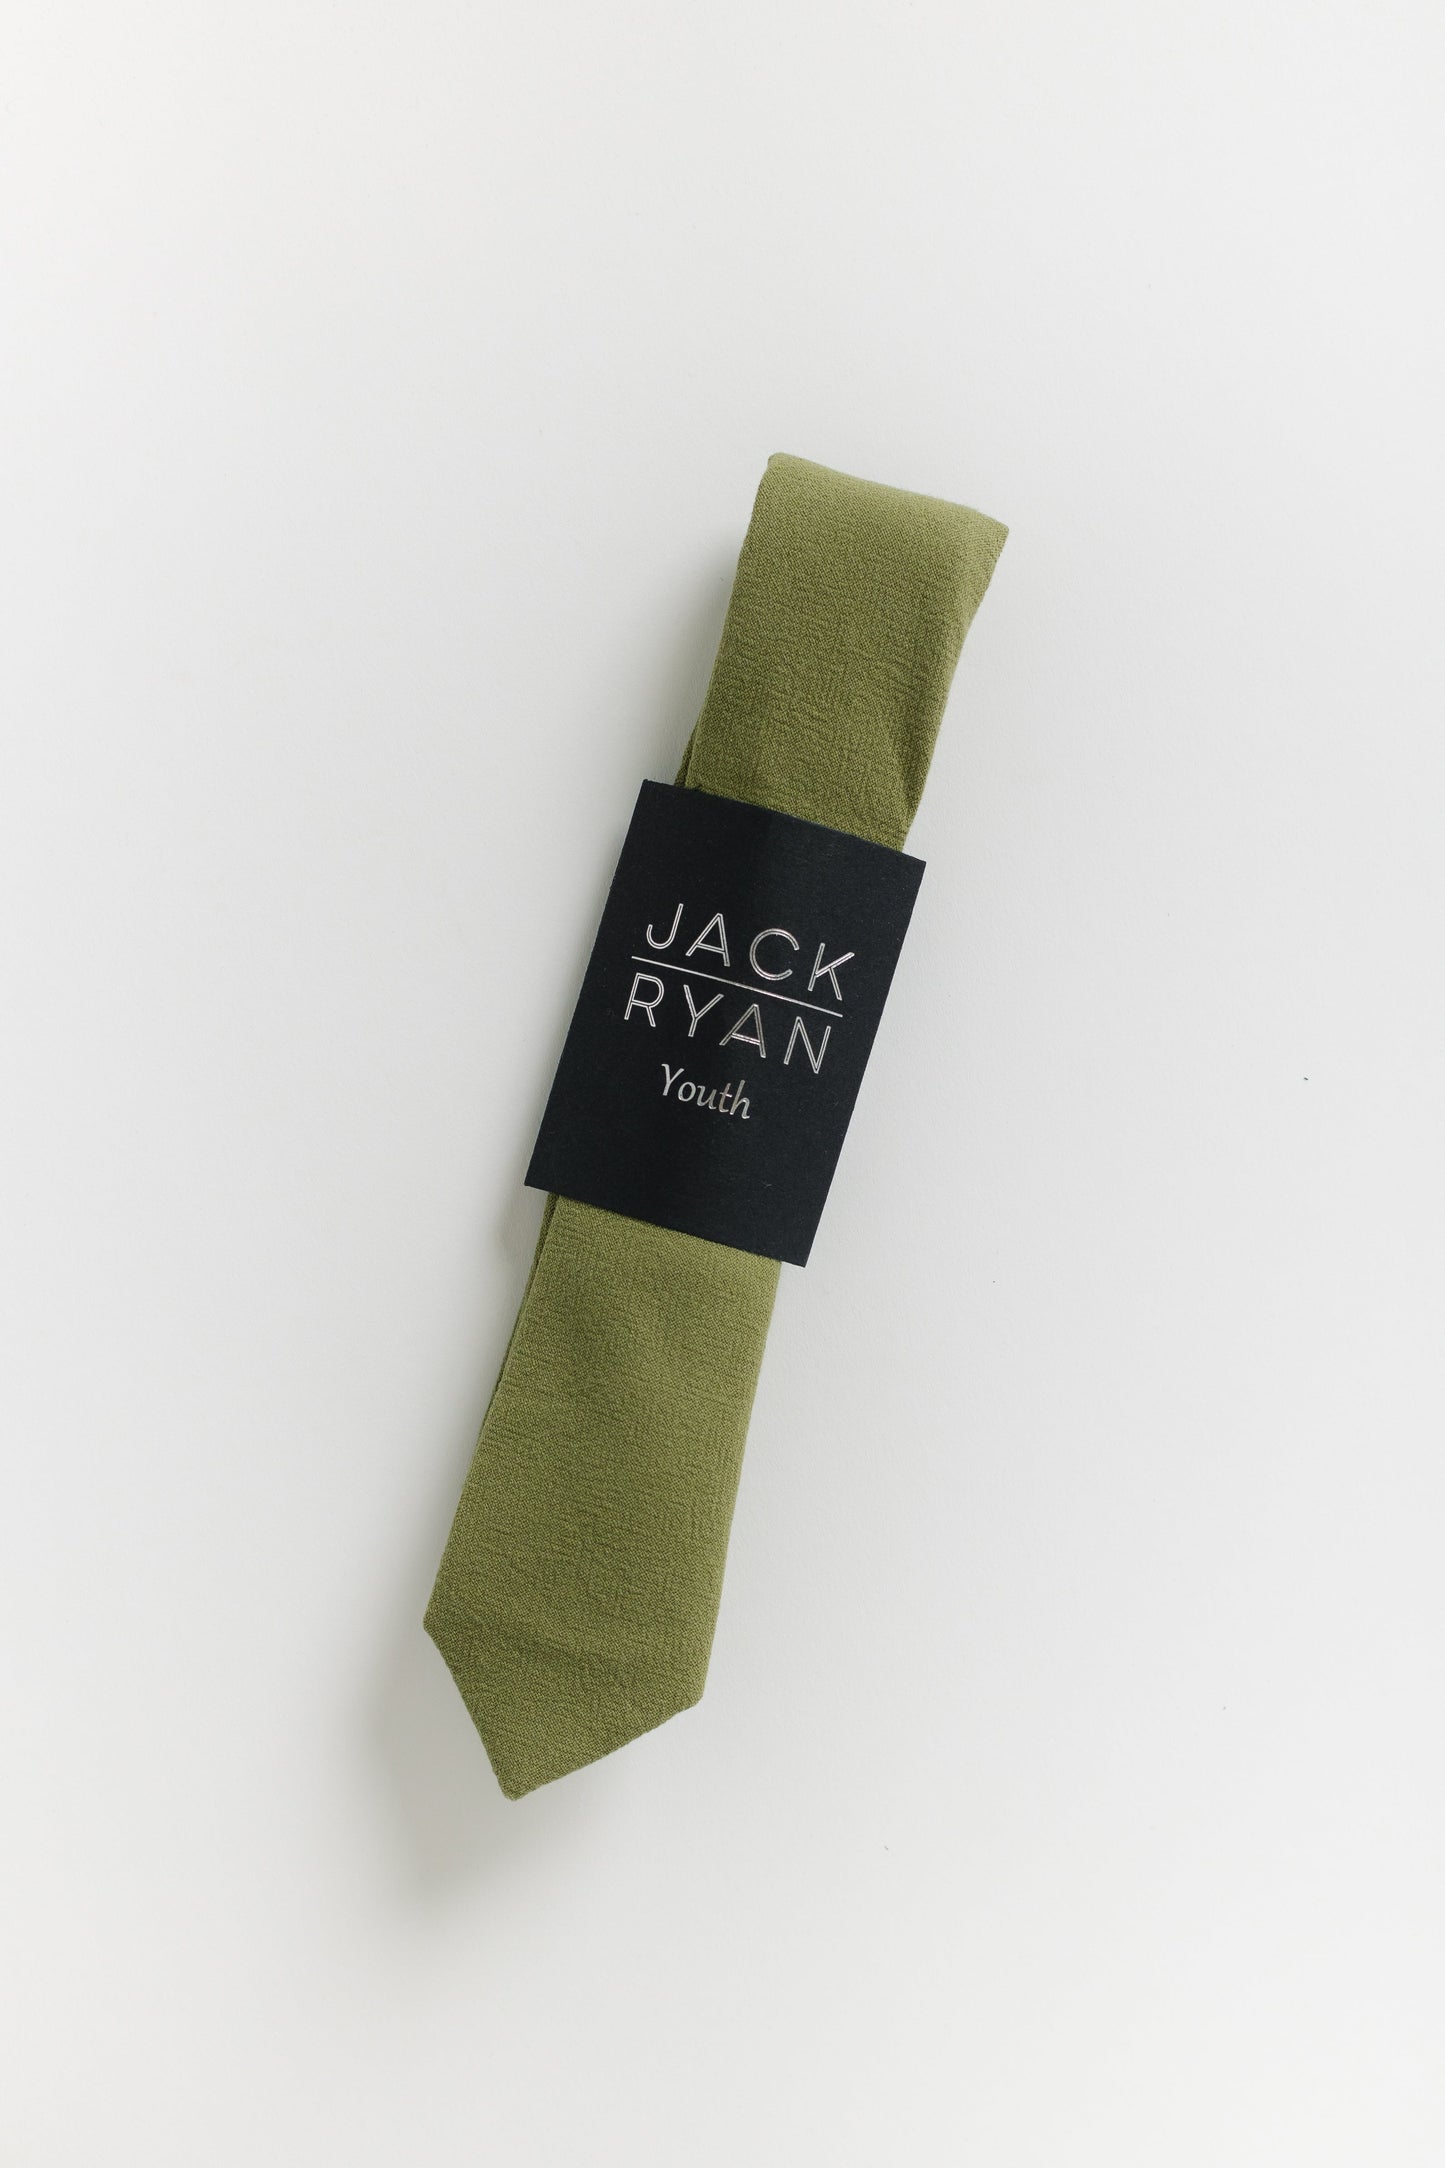 Jack Ryan Solid Collection MEN'S TIE JACK RYAN Moss Youth 48"L x 2"W 